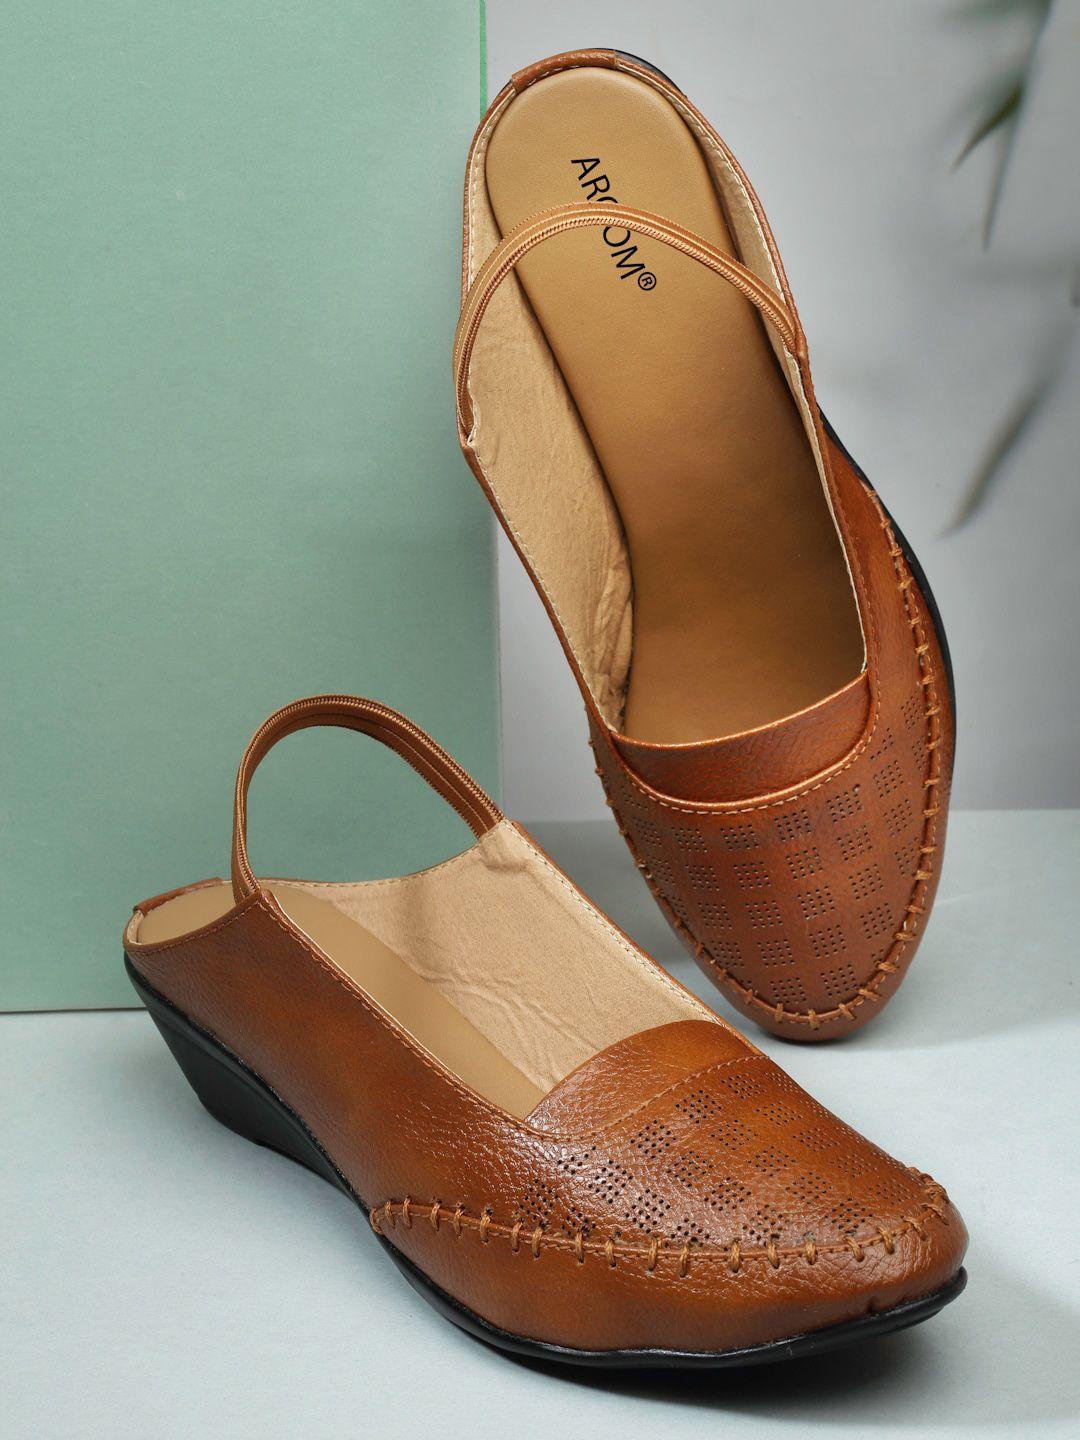 aroom textured leather mules with backstrap